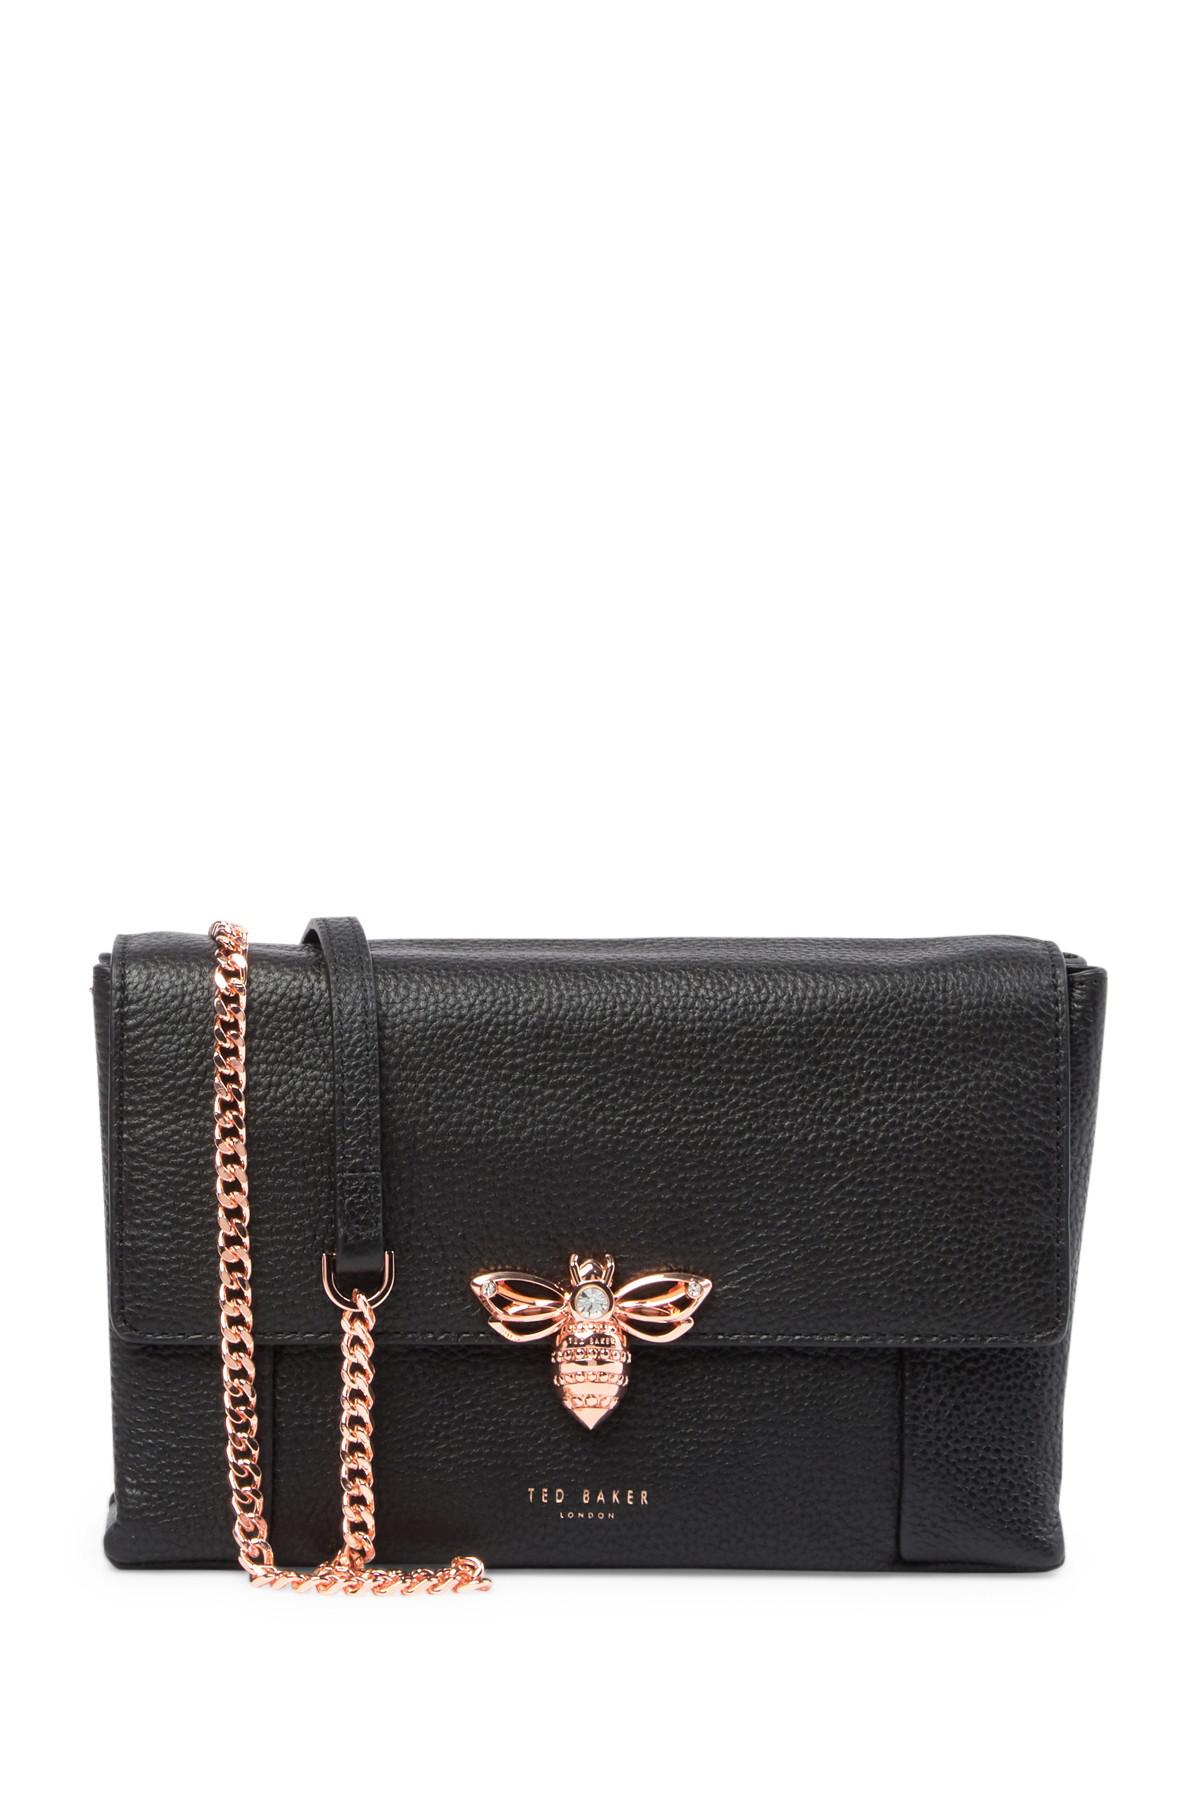 Ted Baker Leather Zzlee Bee Embellished Crossbody Bag in Black - Lyst